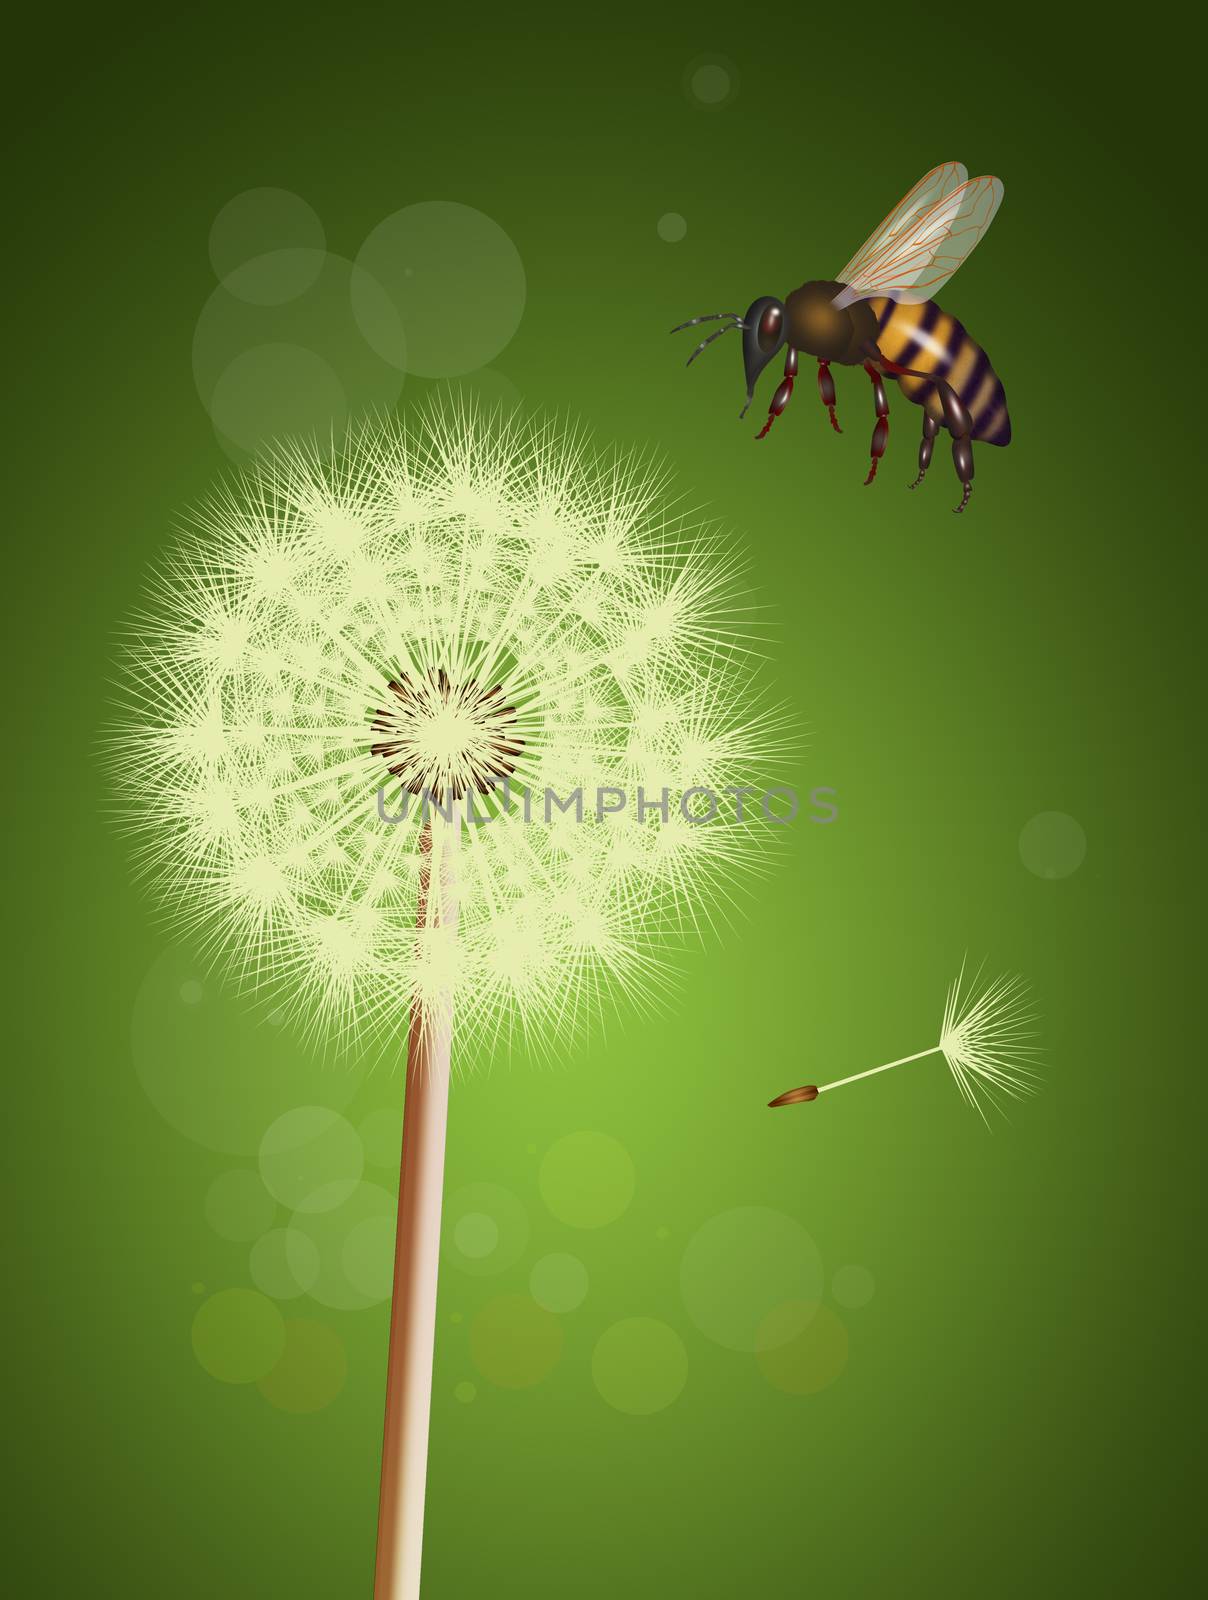 illustration of bee on dandelion by adrenalina